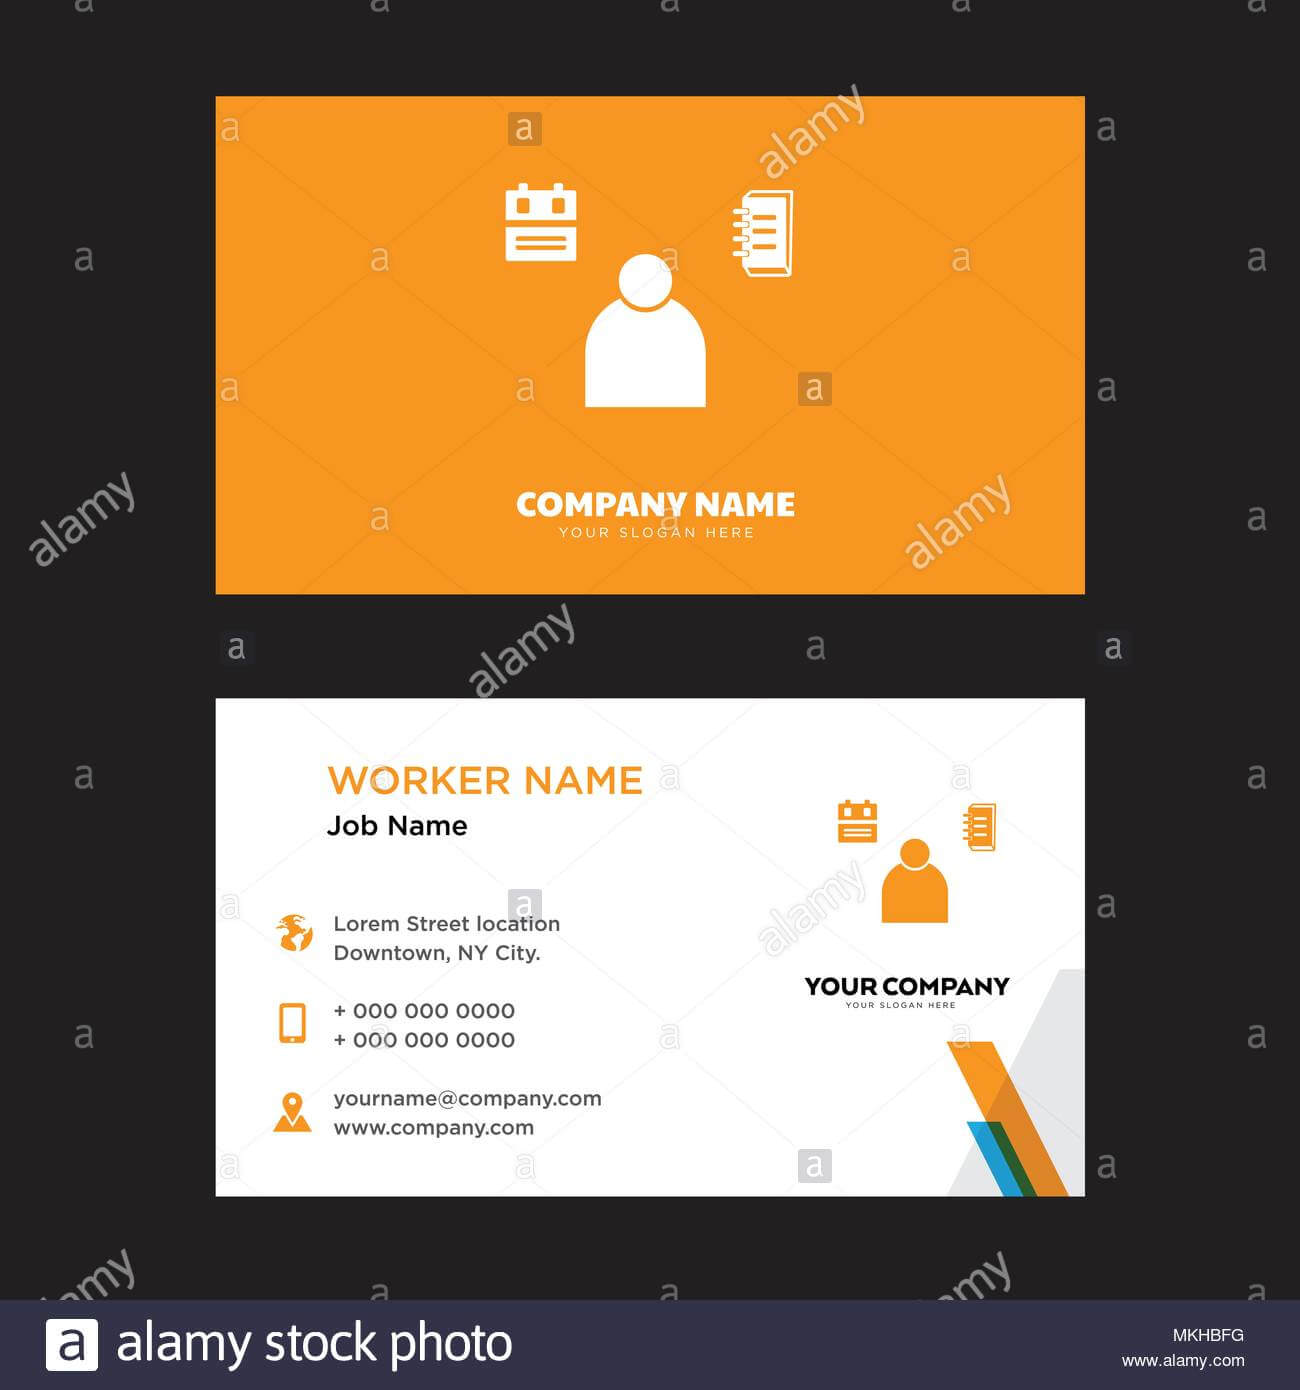 Student Business Card Design Template, Visiting For Your For Student Business Card Template